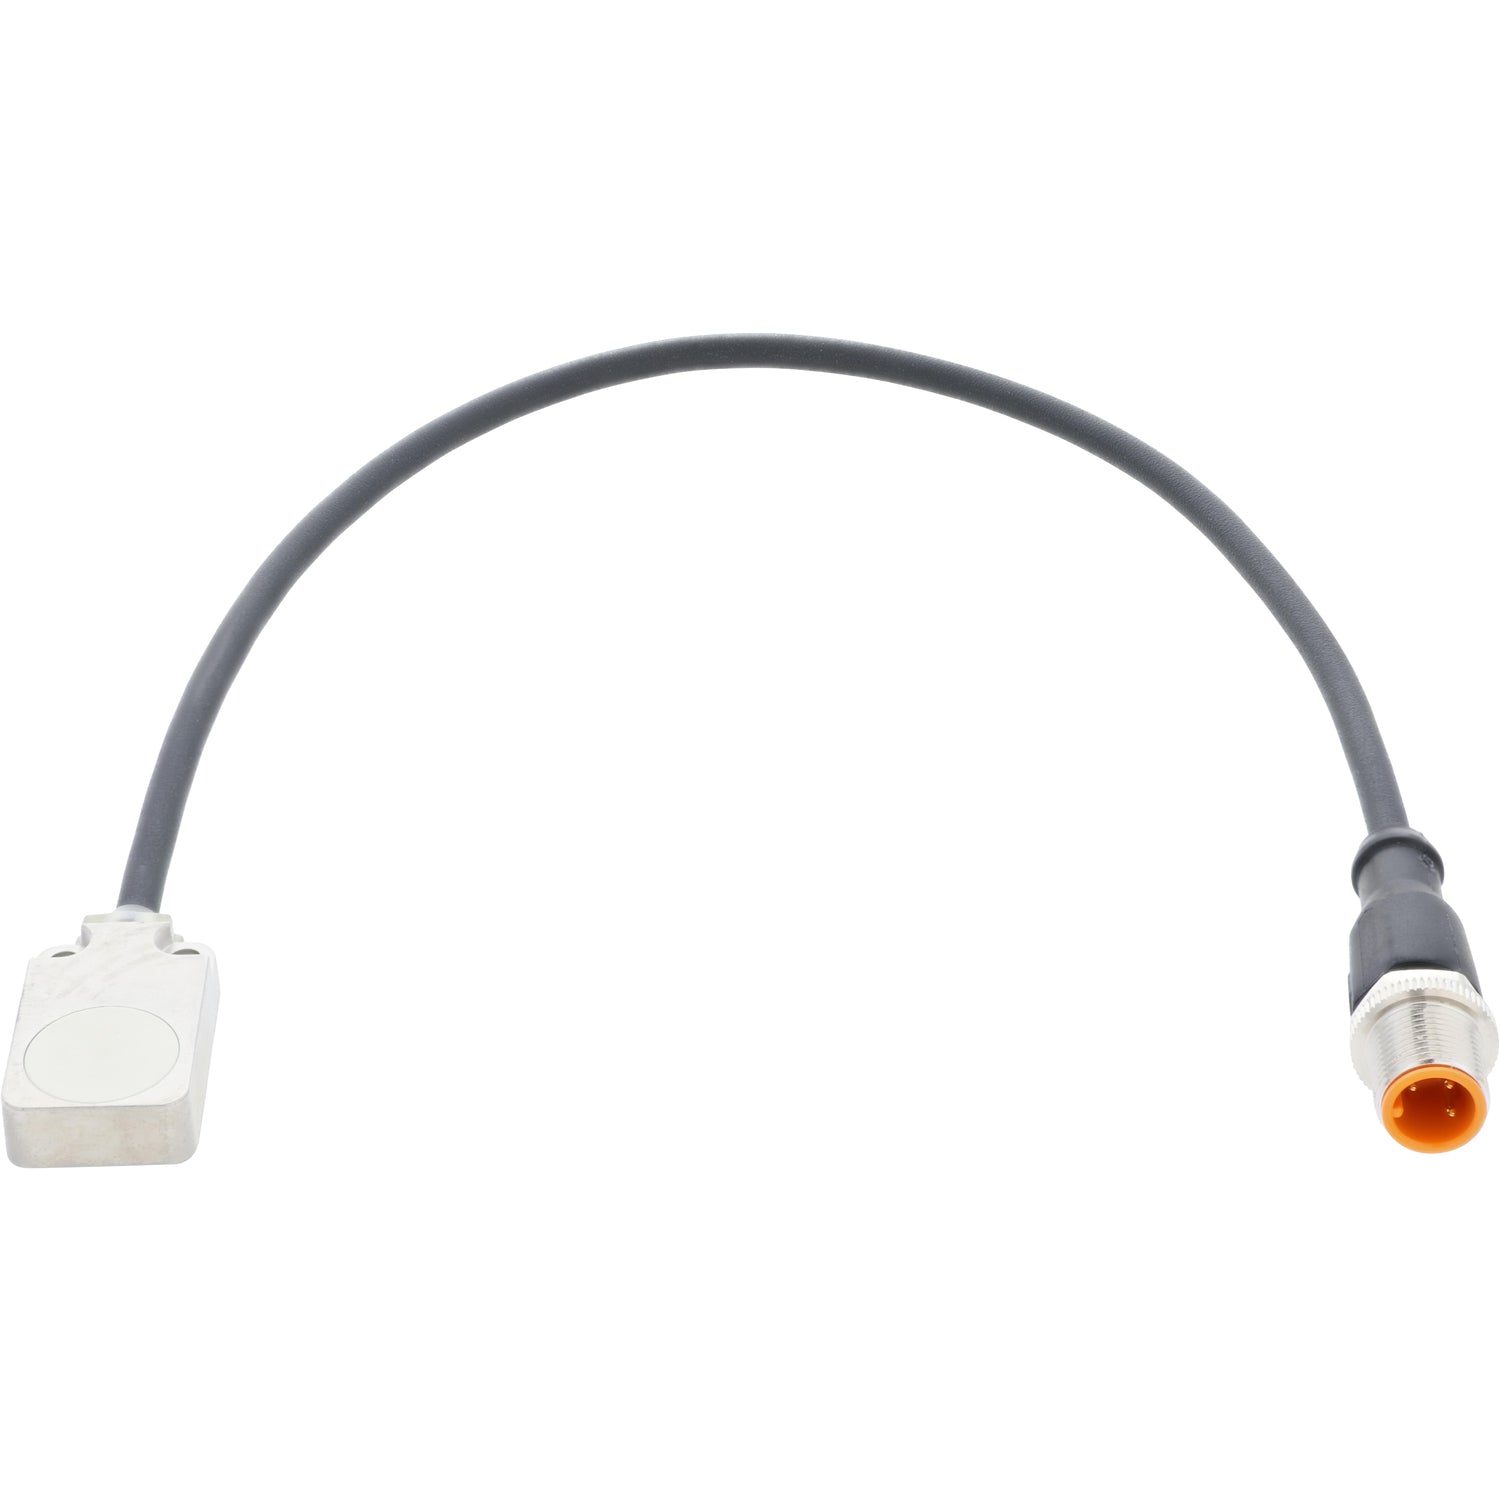 Black sensor cable with rectangular inductive sensor on one end and a 3 pin male connector on the other. Part shown on white background. 